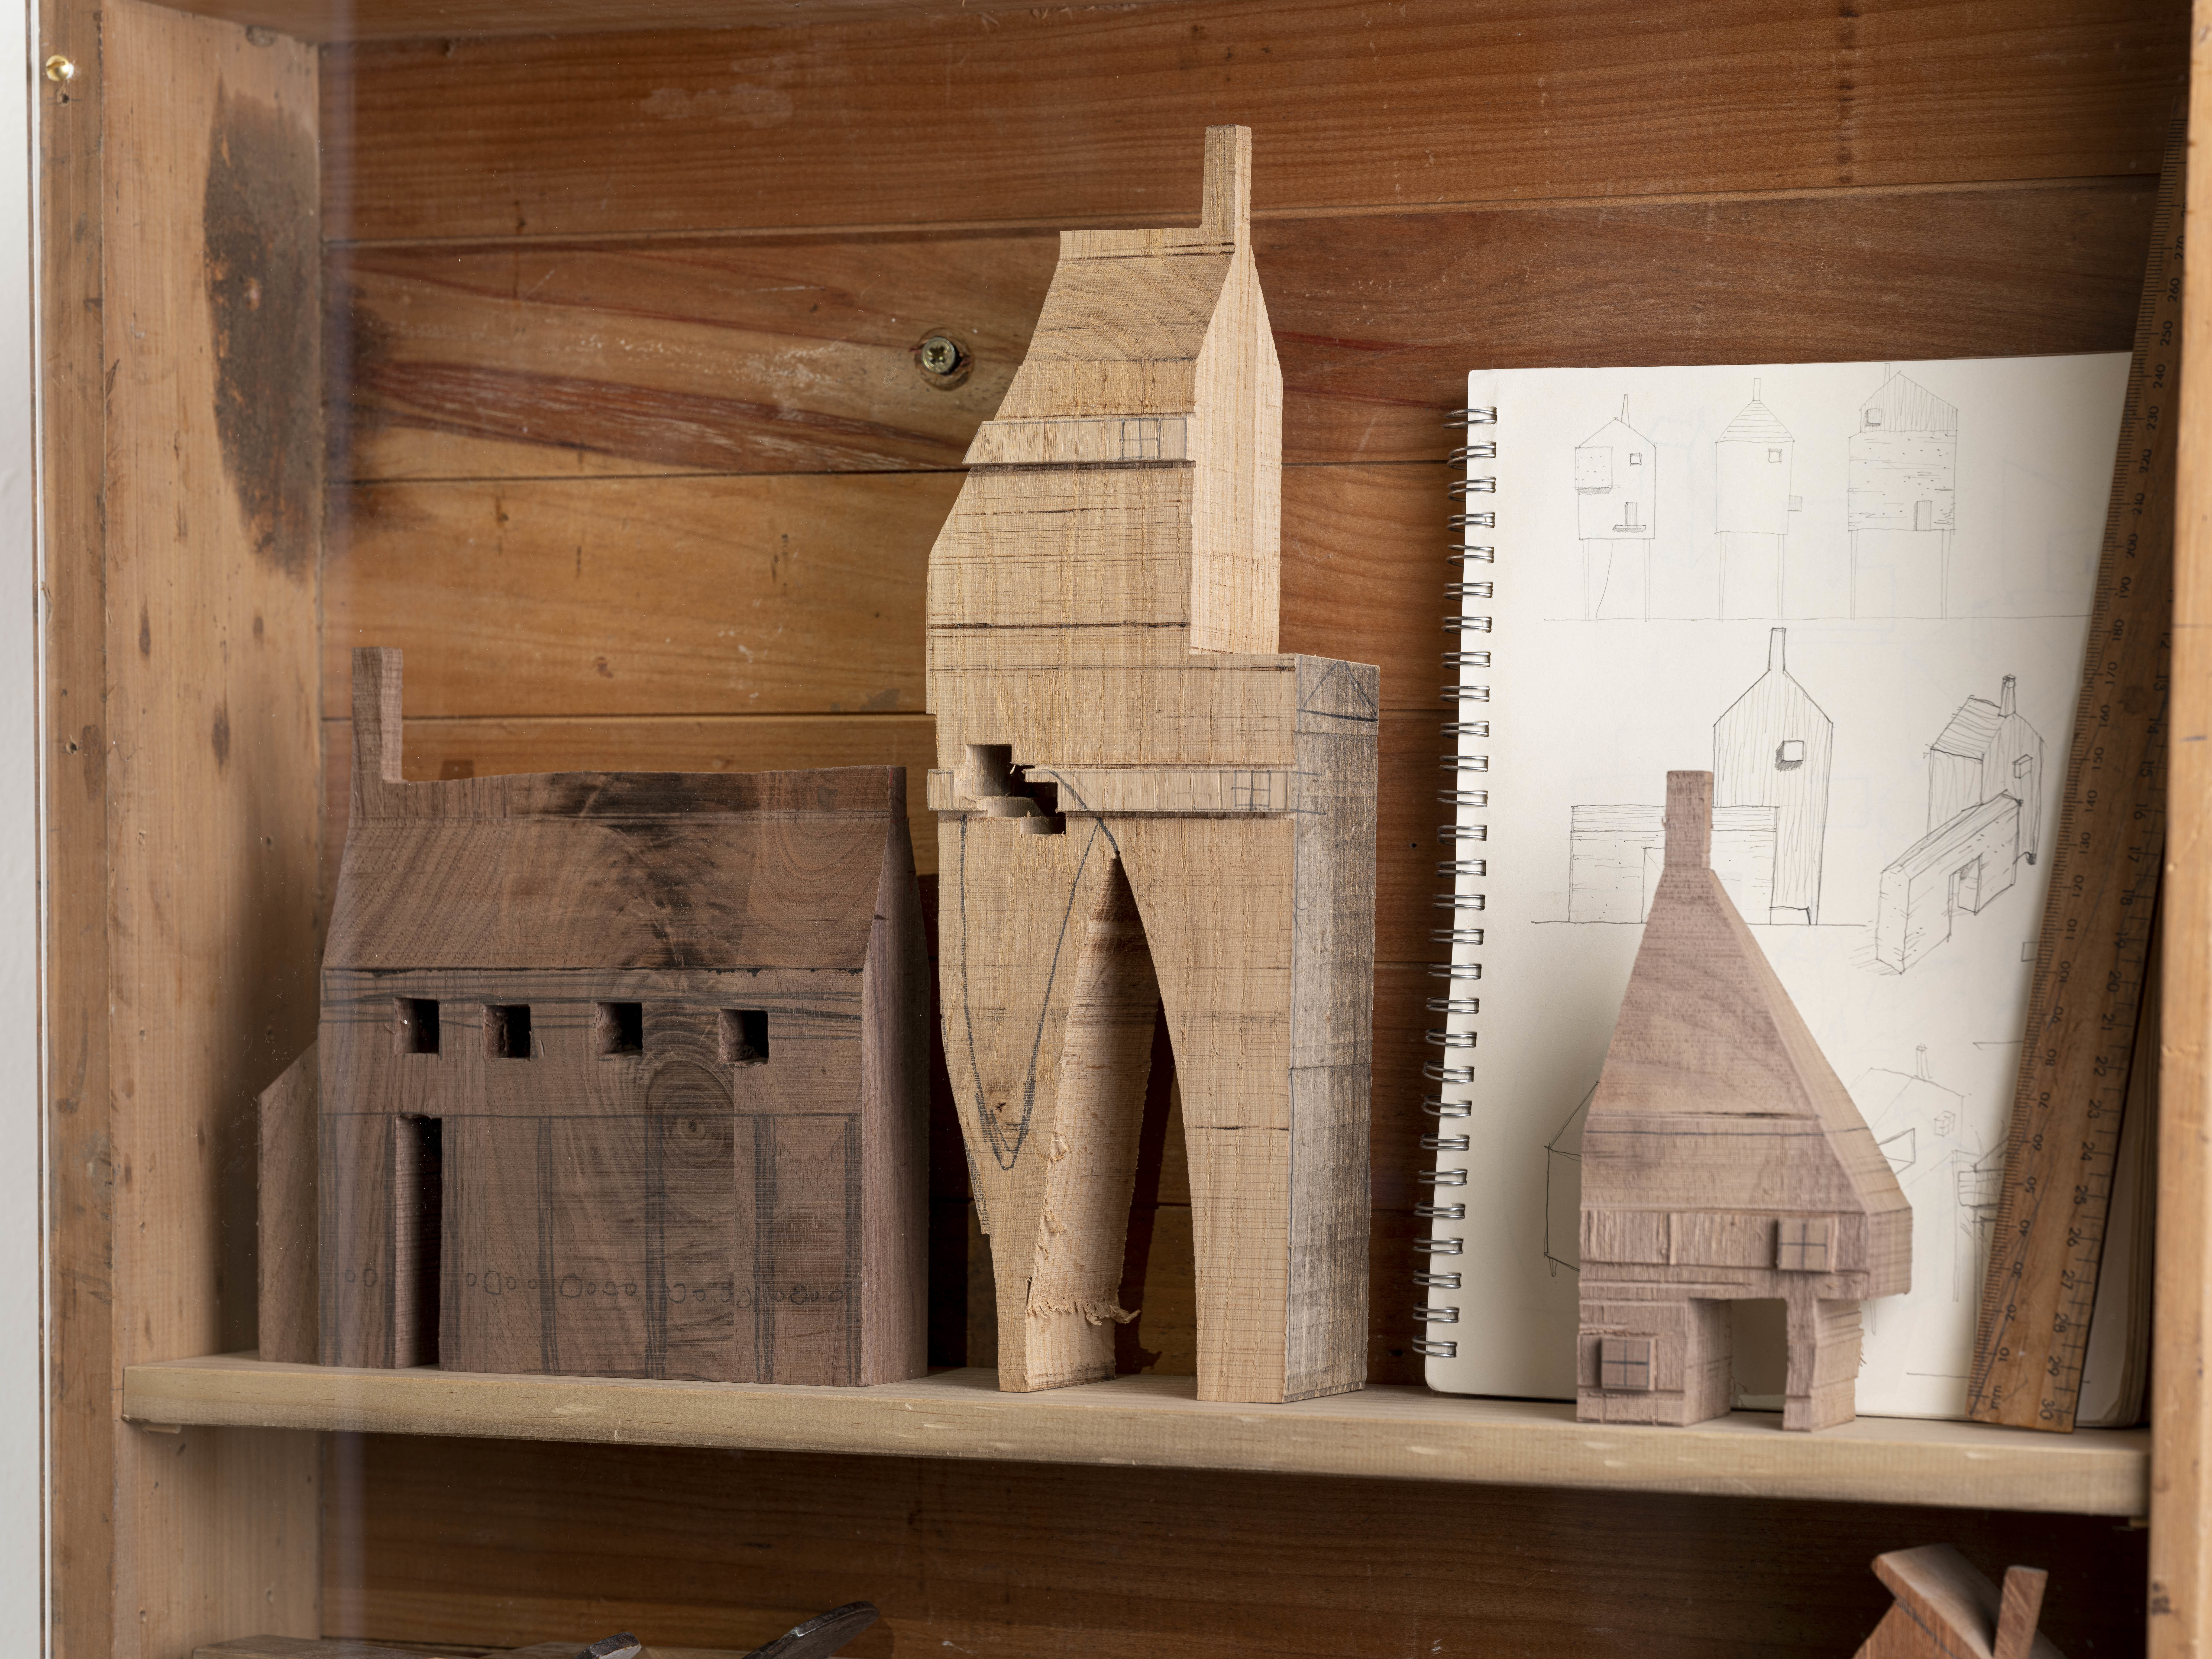 Three miniature wooden houses and a pencil drawing of a house on a shelf.